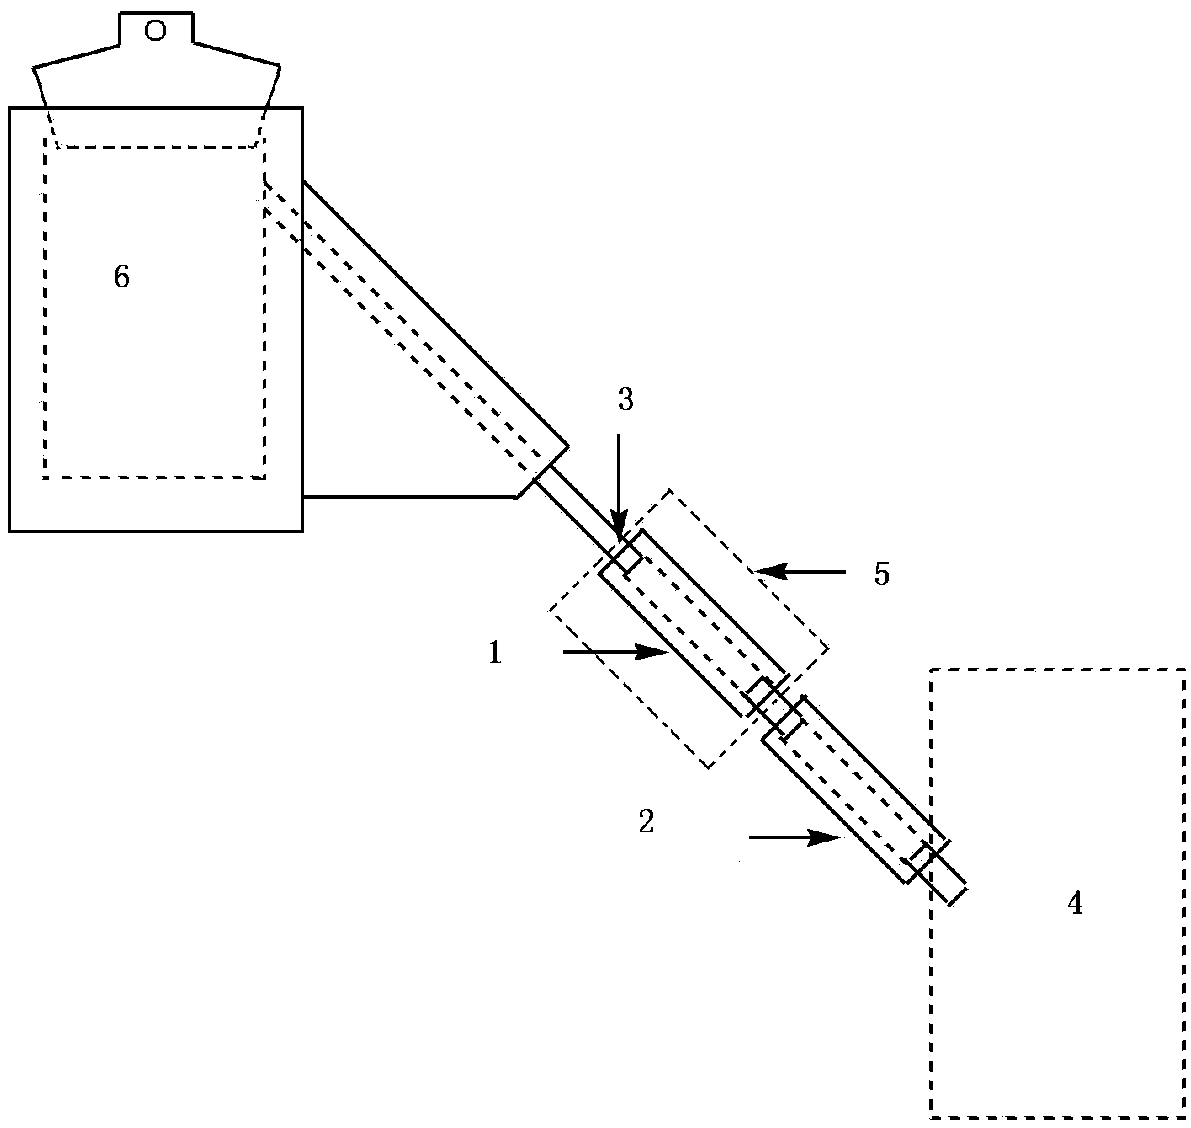 Oil-water separator in oil shale dry distillation analysis and oil-water content determination method